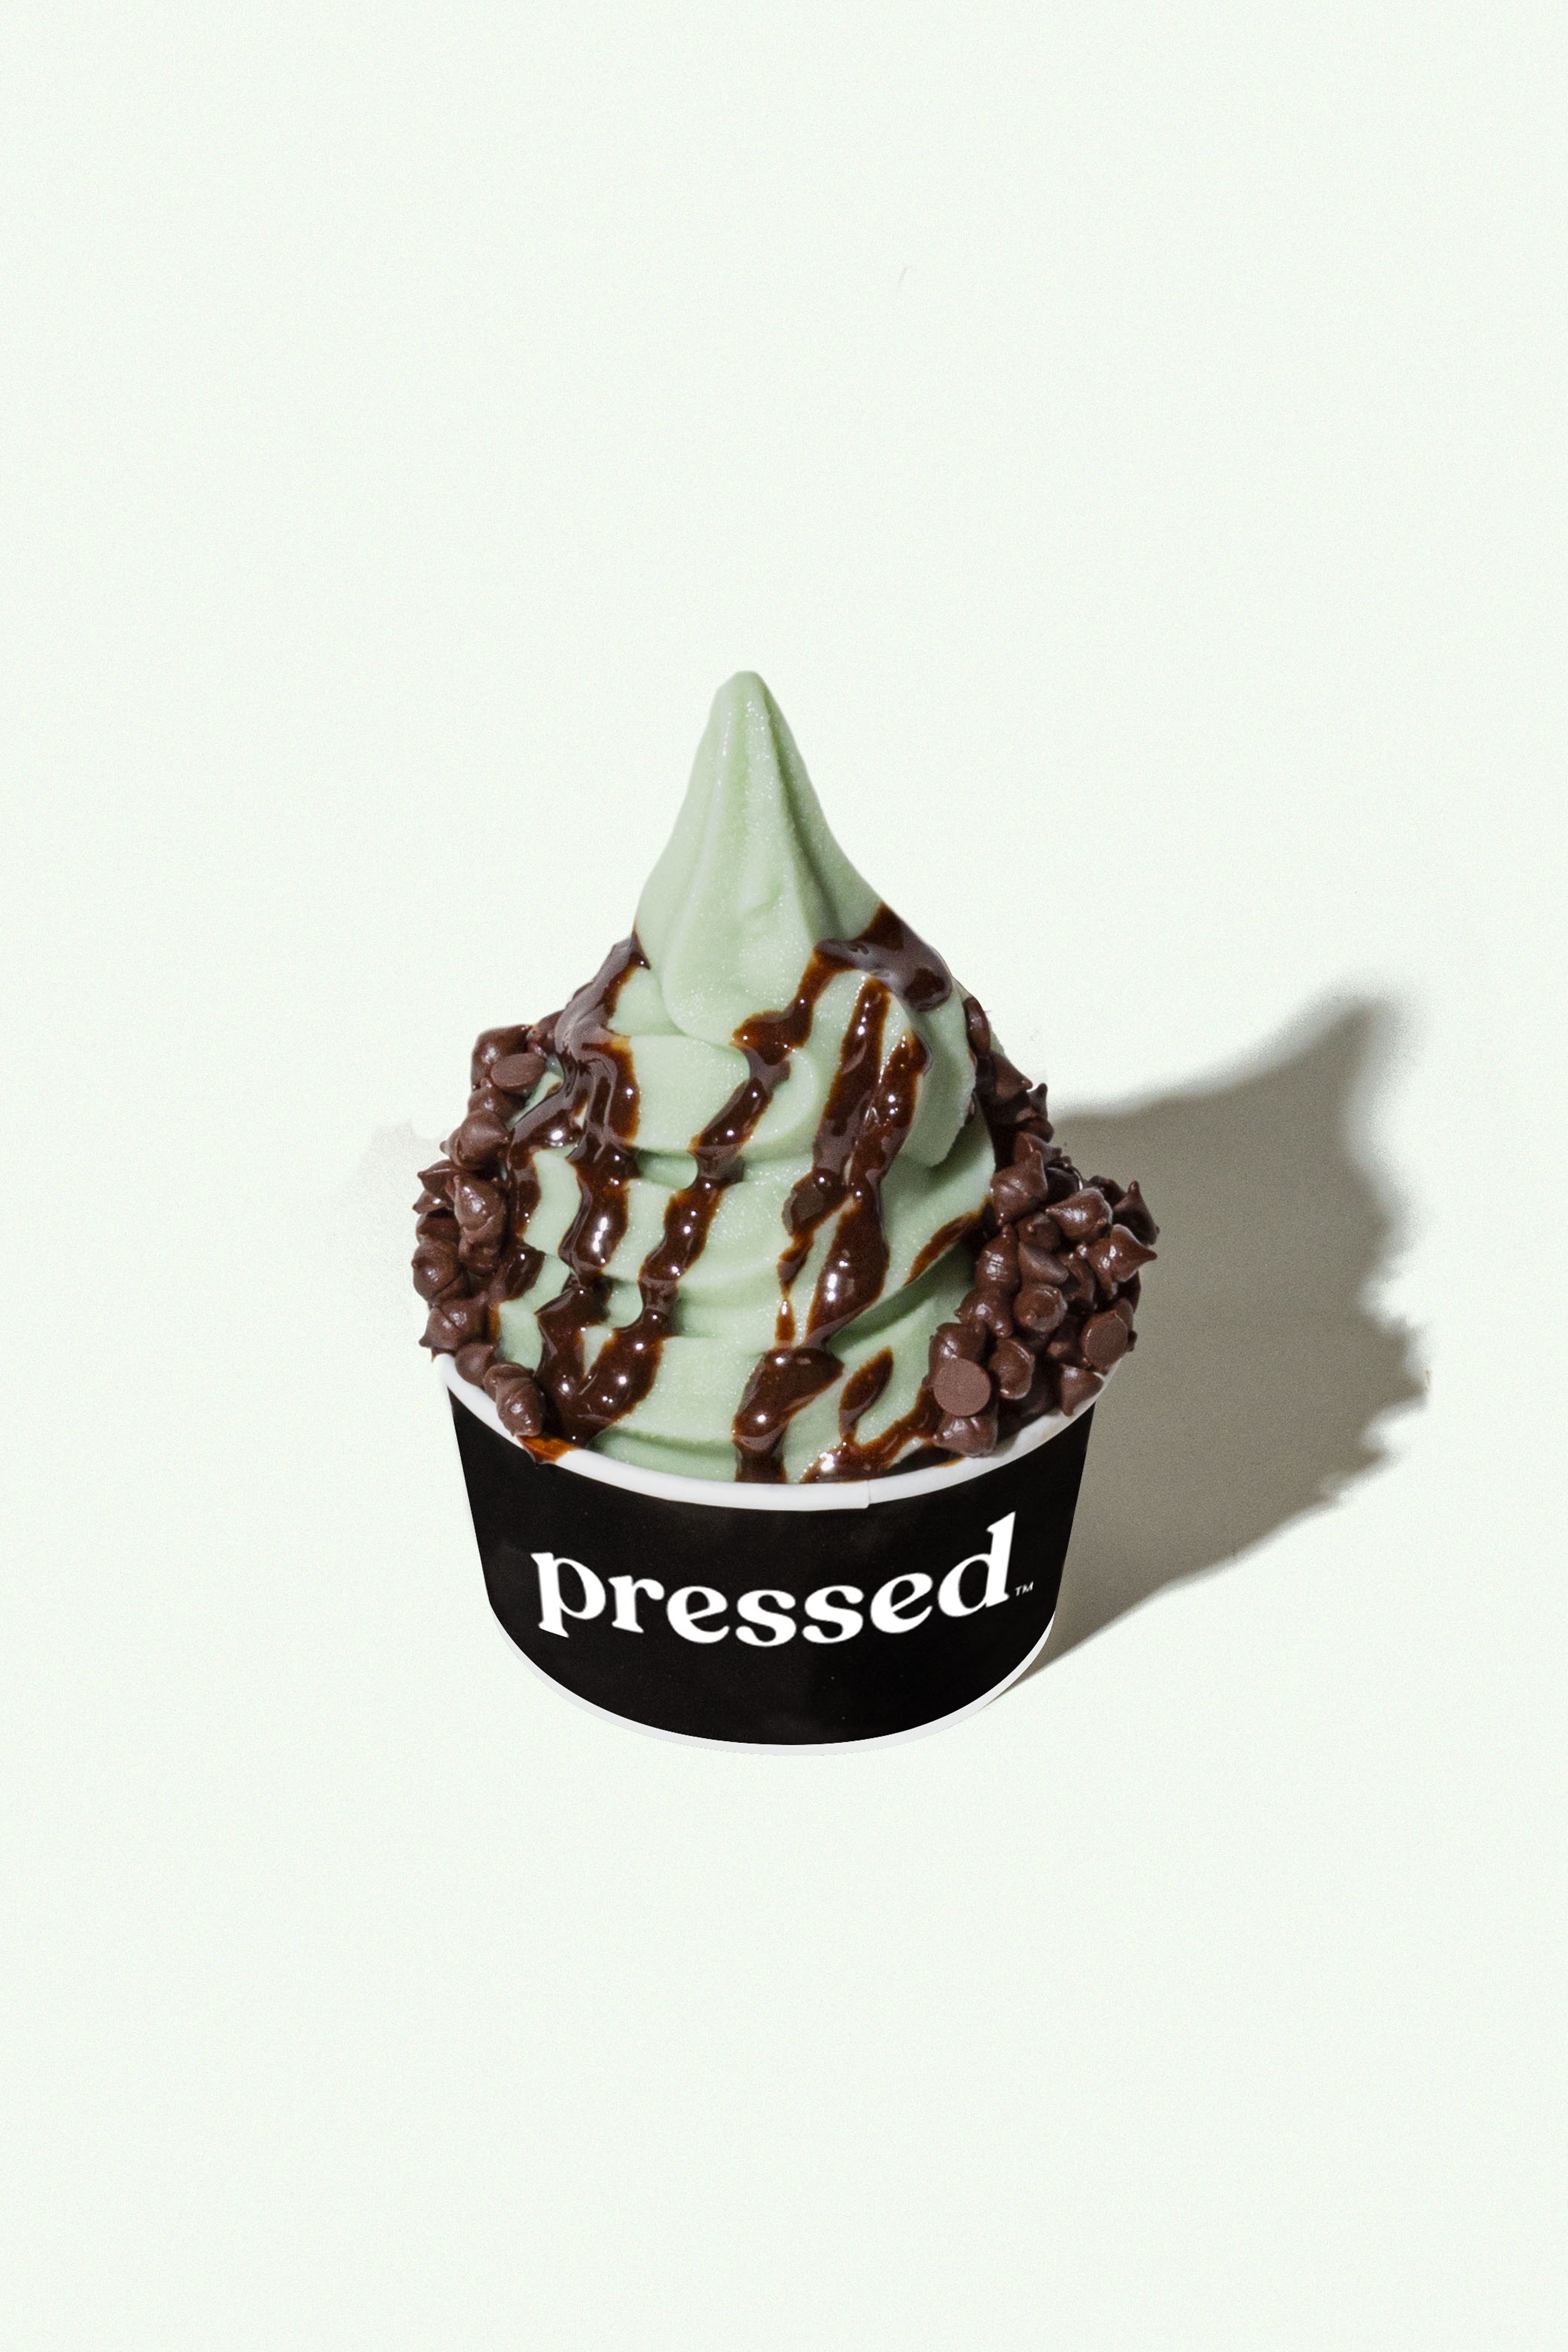 Mint Chocolate Chip Freeze Sundae Launch from Pressed